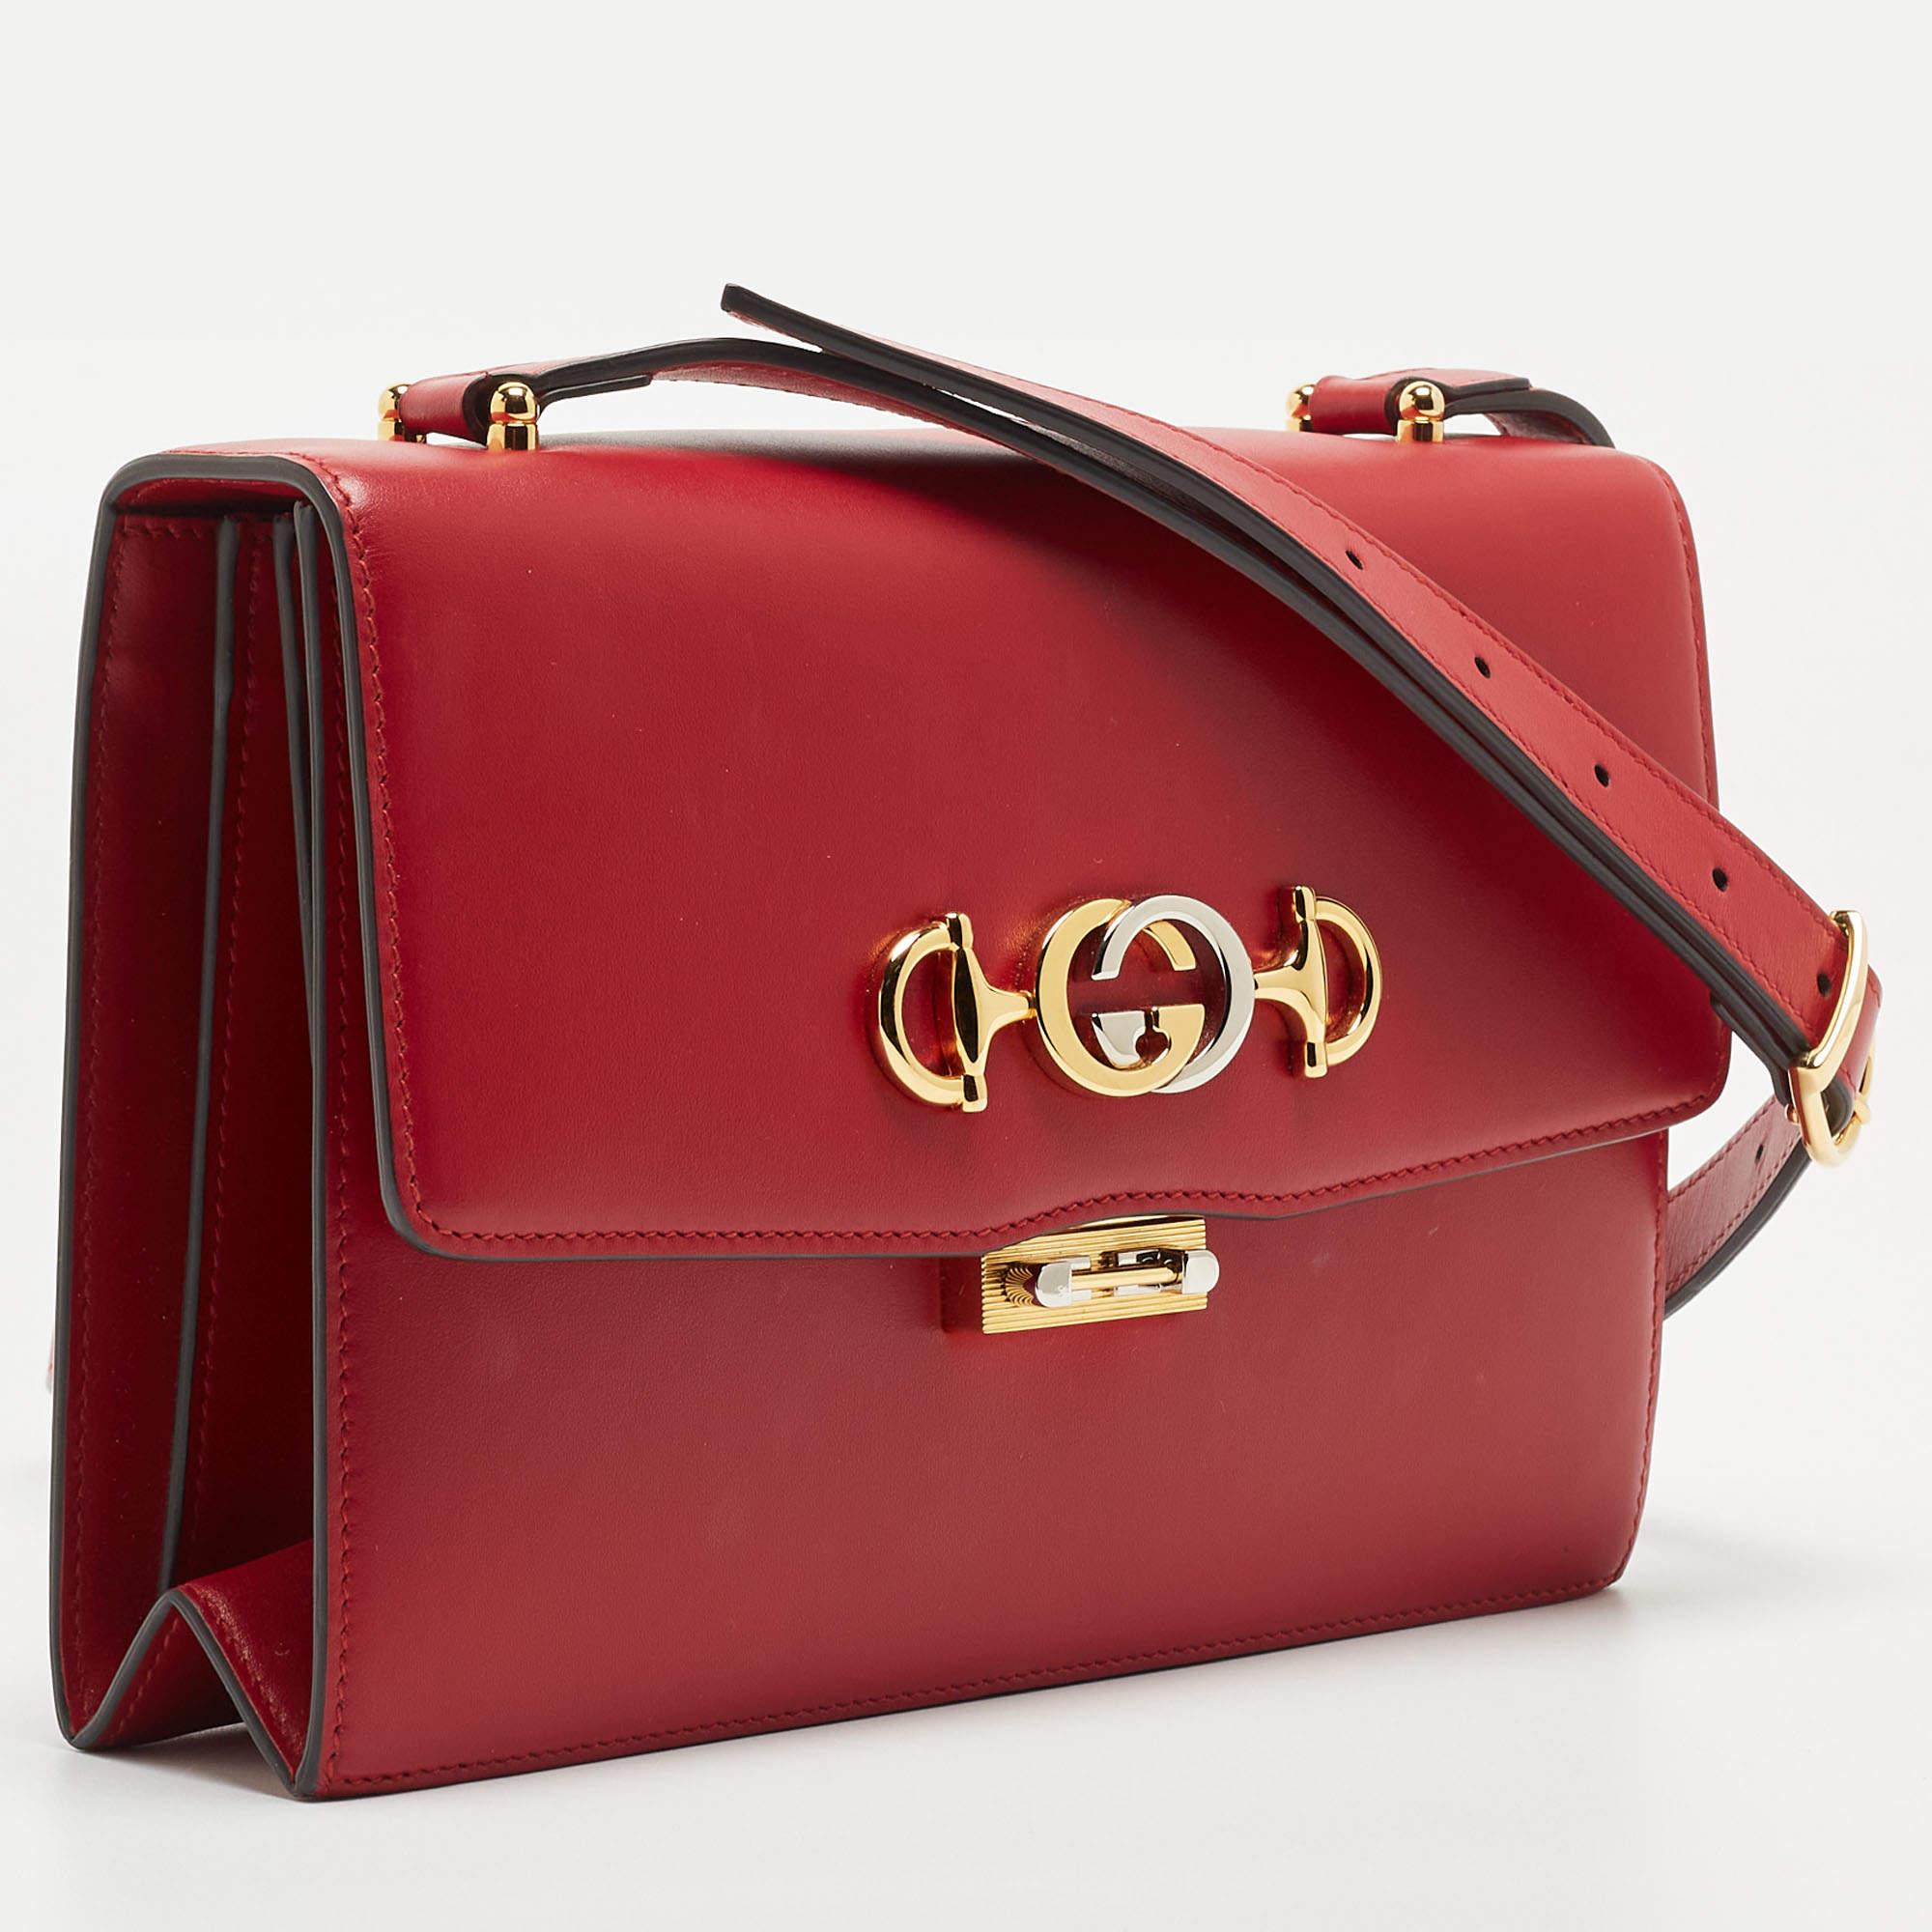 The Zumi line from Gucci is named after actress & musician Zumi Rosow. This bag merges two distinctive signatures—the interlocking GG logo and the Horsebit—to deliver a signature look that is chic and unexpected. The Gucci Zumi bag is crafted from